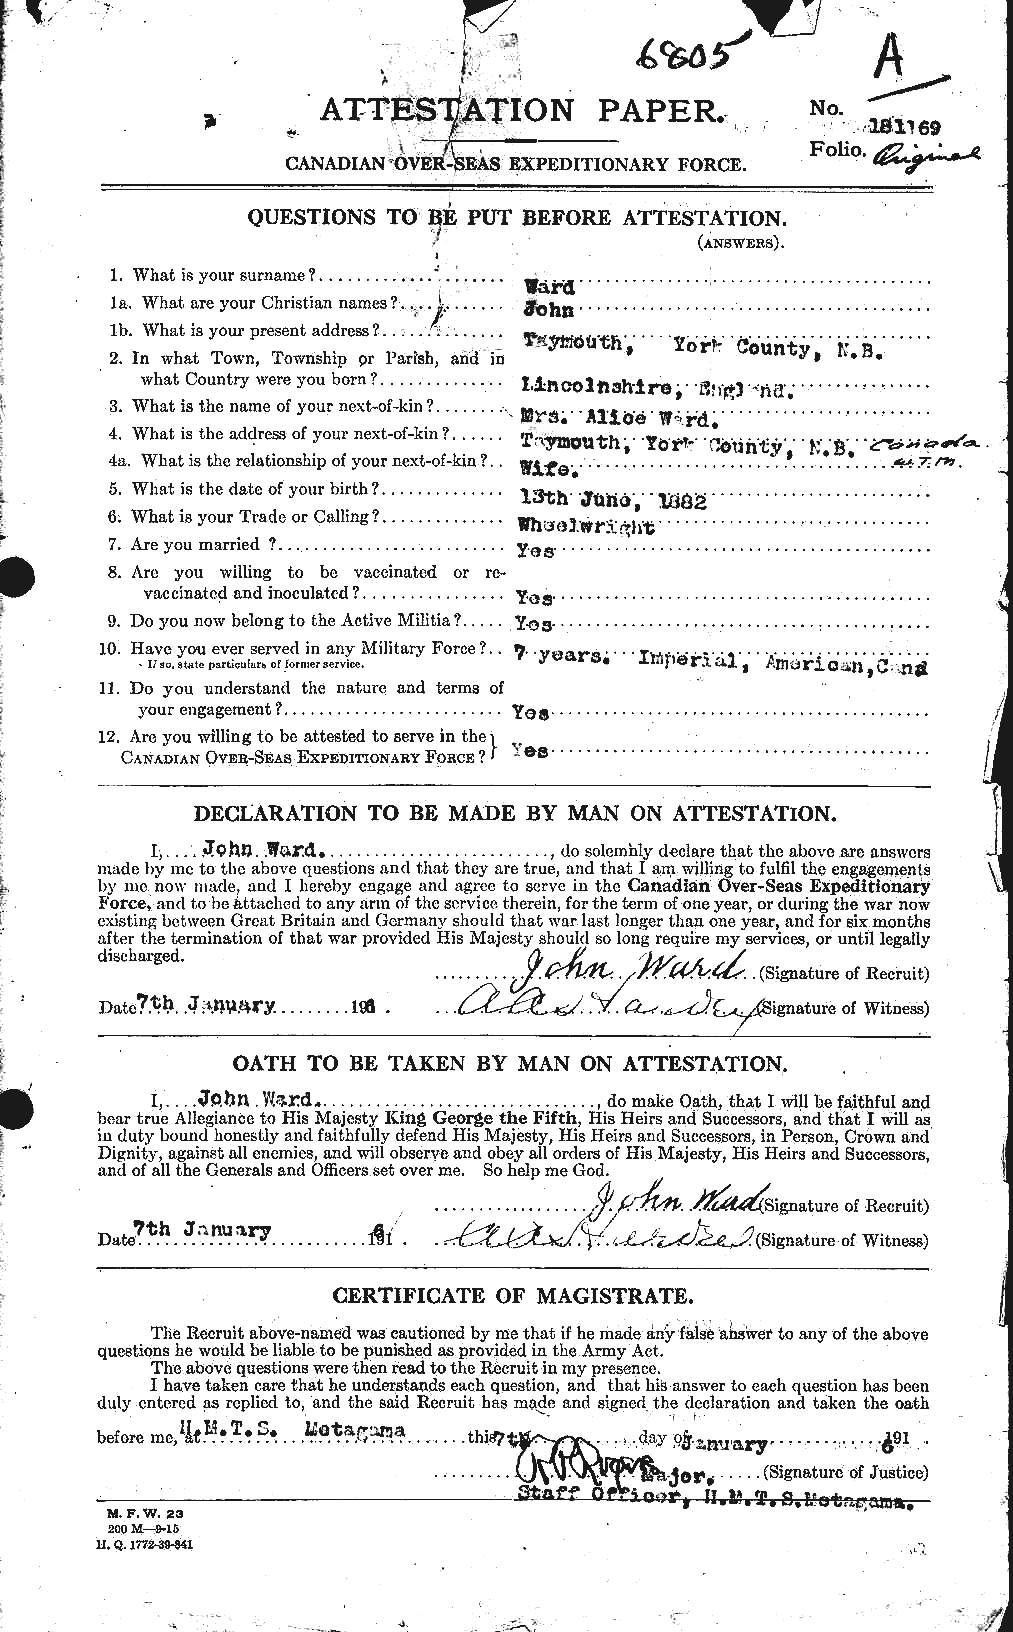 Personnel Records of the First World War - CEF 657930a